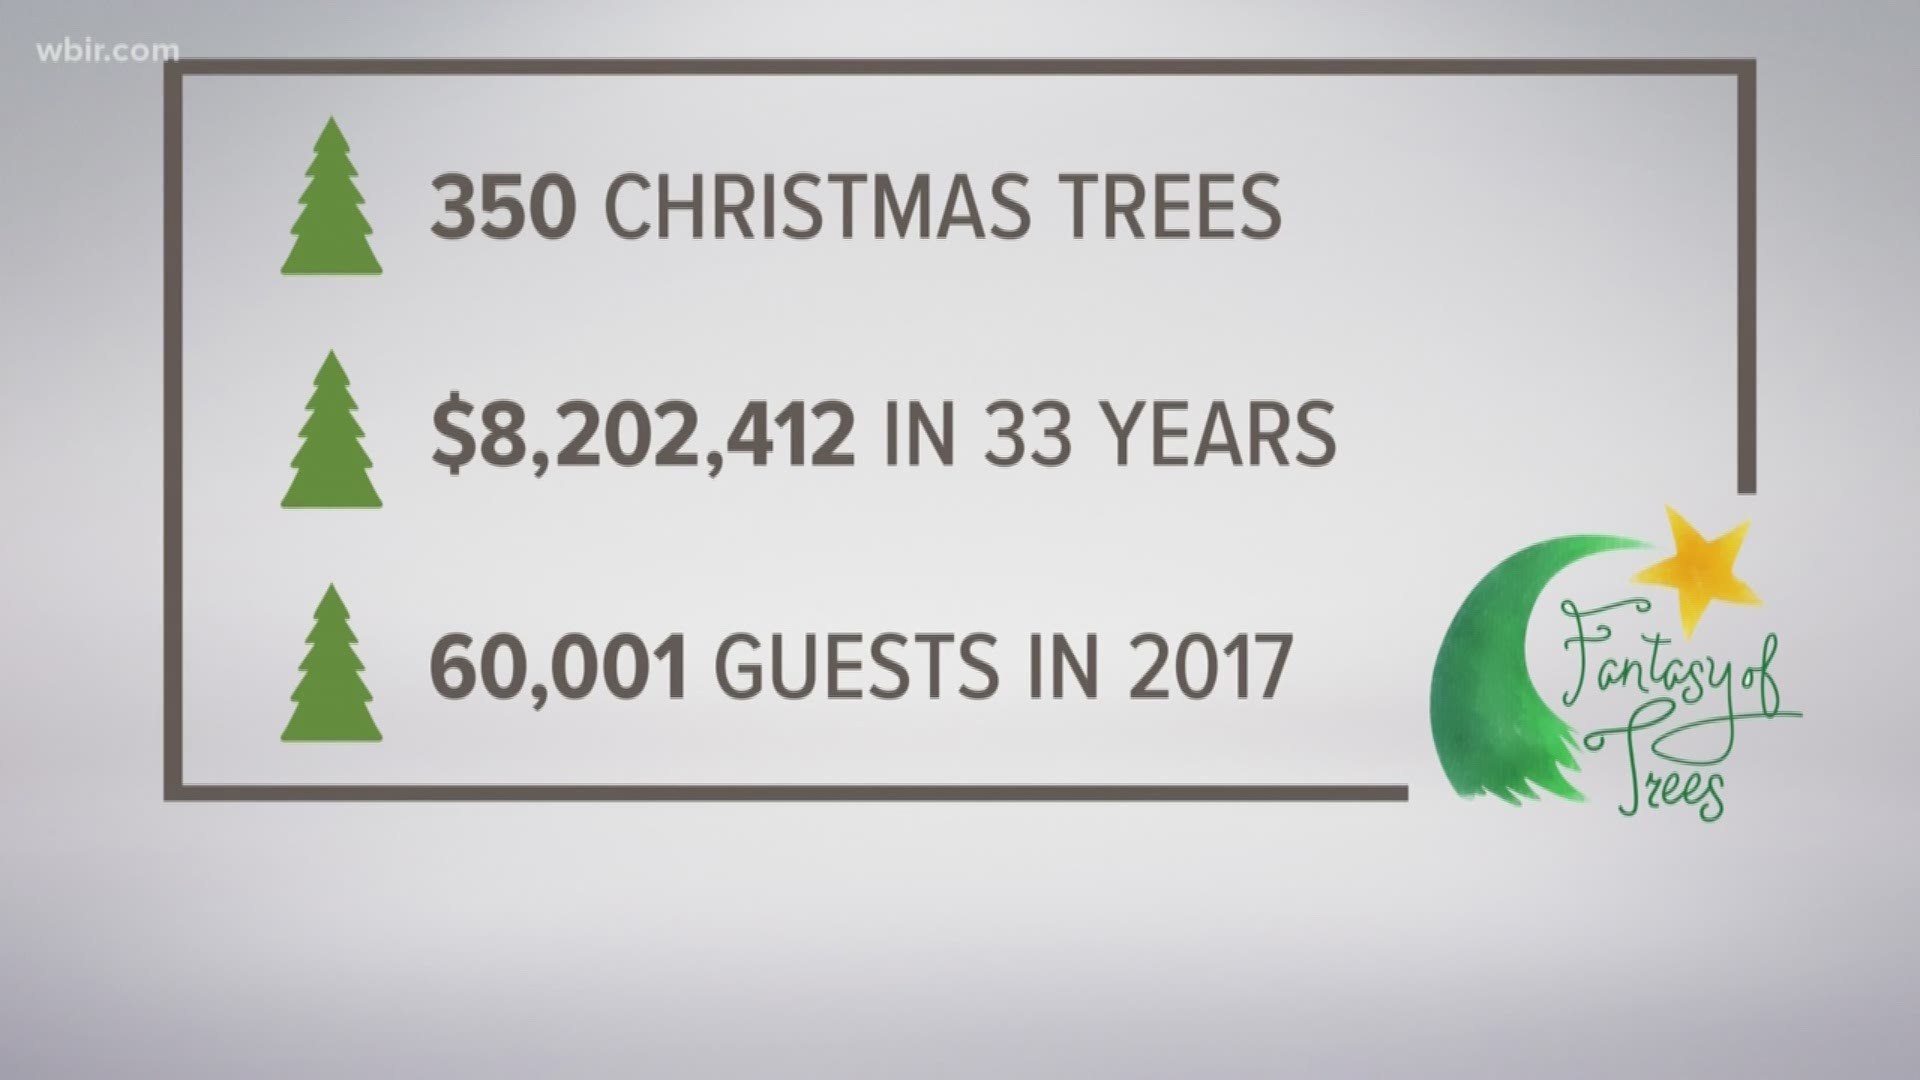 This year's event will feature 350 designer trees. Over the past 33 years- Fantasy of Trees has raised more than $8 million in proceeds for the hospital.